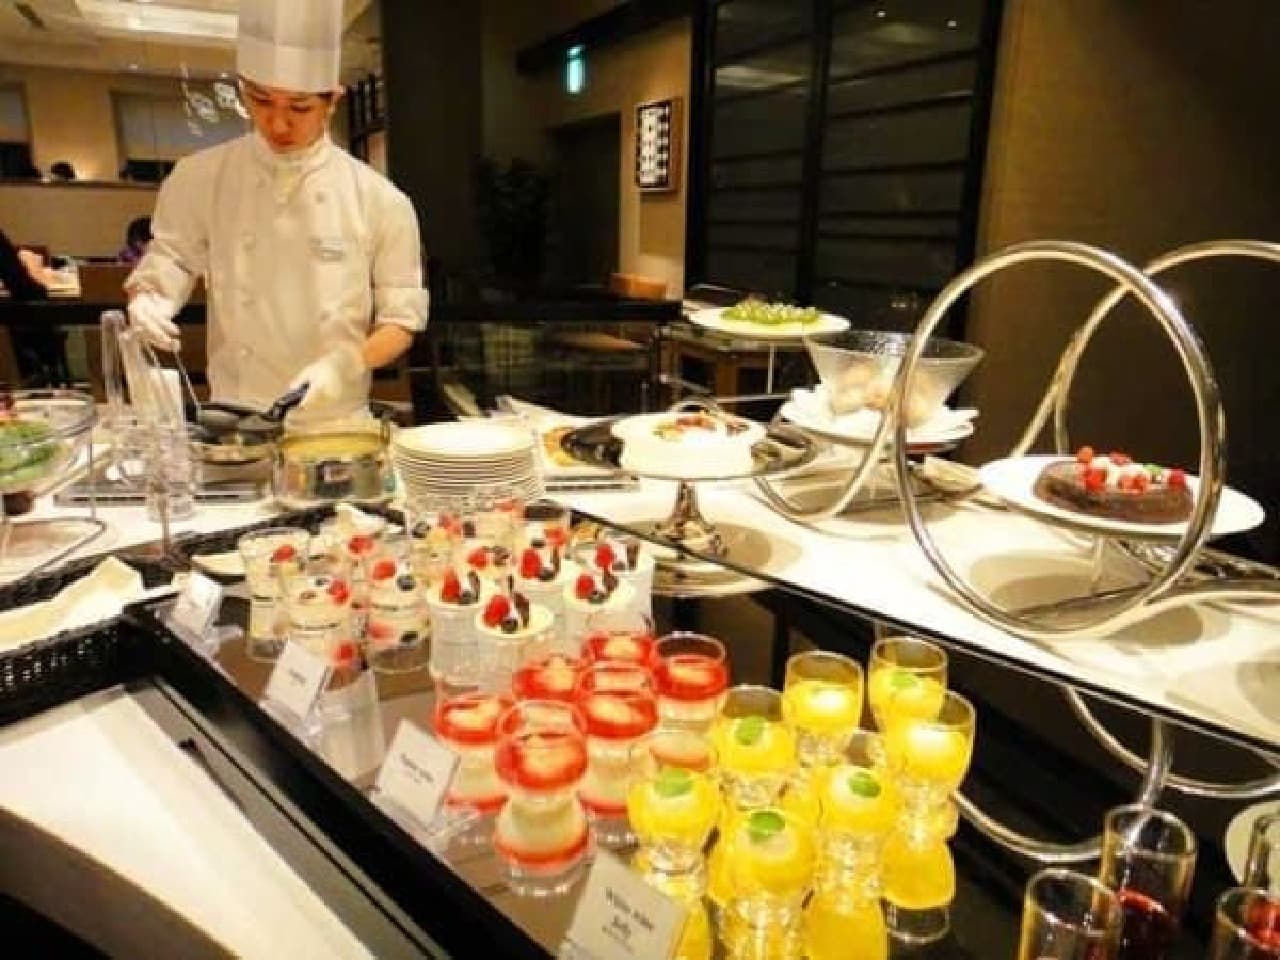 Dessert buffet where you can enjoy crepes made by pastry chefs in front of you